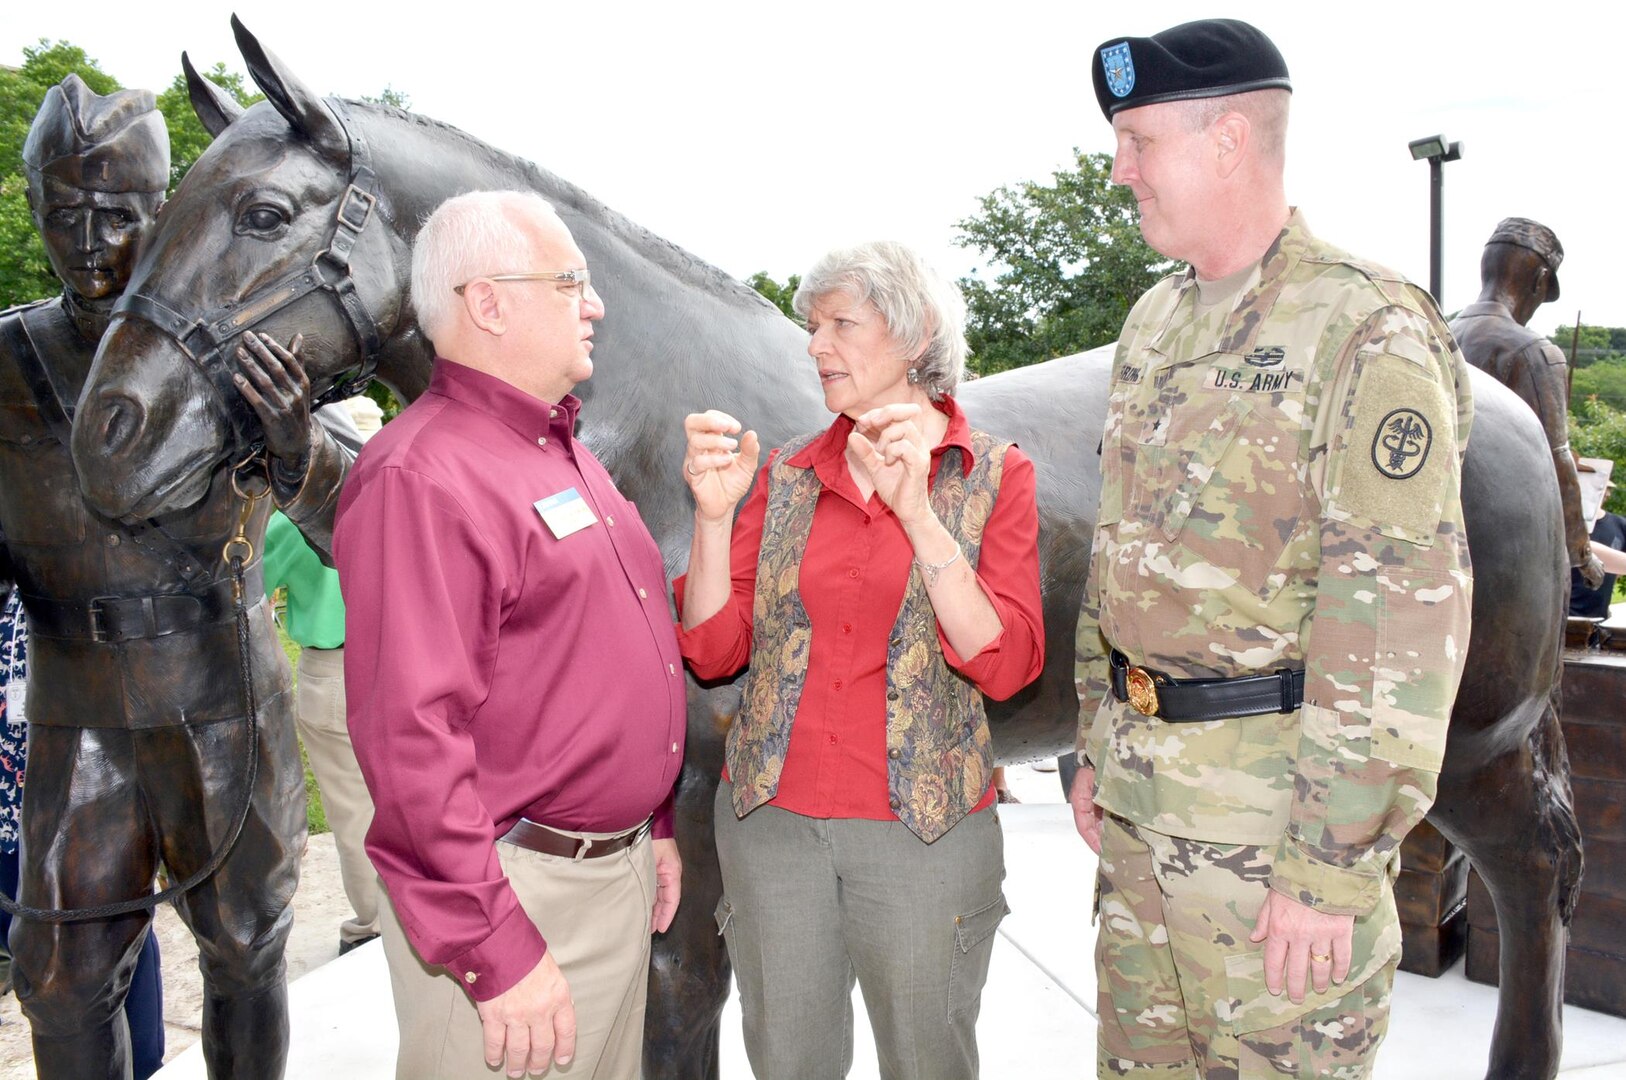 (From left) Dr. Joseph Kinnarney, Donna Dobberfuhl and Brig. Gen. Erik H. Torring talk in front of the new U.S. Army Veterinary Corps monument unveiled at the U.S. Army Medical Department Museum June 3 at Fort Sam Houston.
Kinnarney is the American Veterinary Medical Association president, Dobberfuhl is the local artist commissioned to create the sculpture and Torring is chief of the U.S. Army Veterinary Corps.